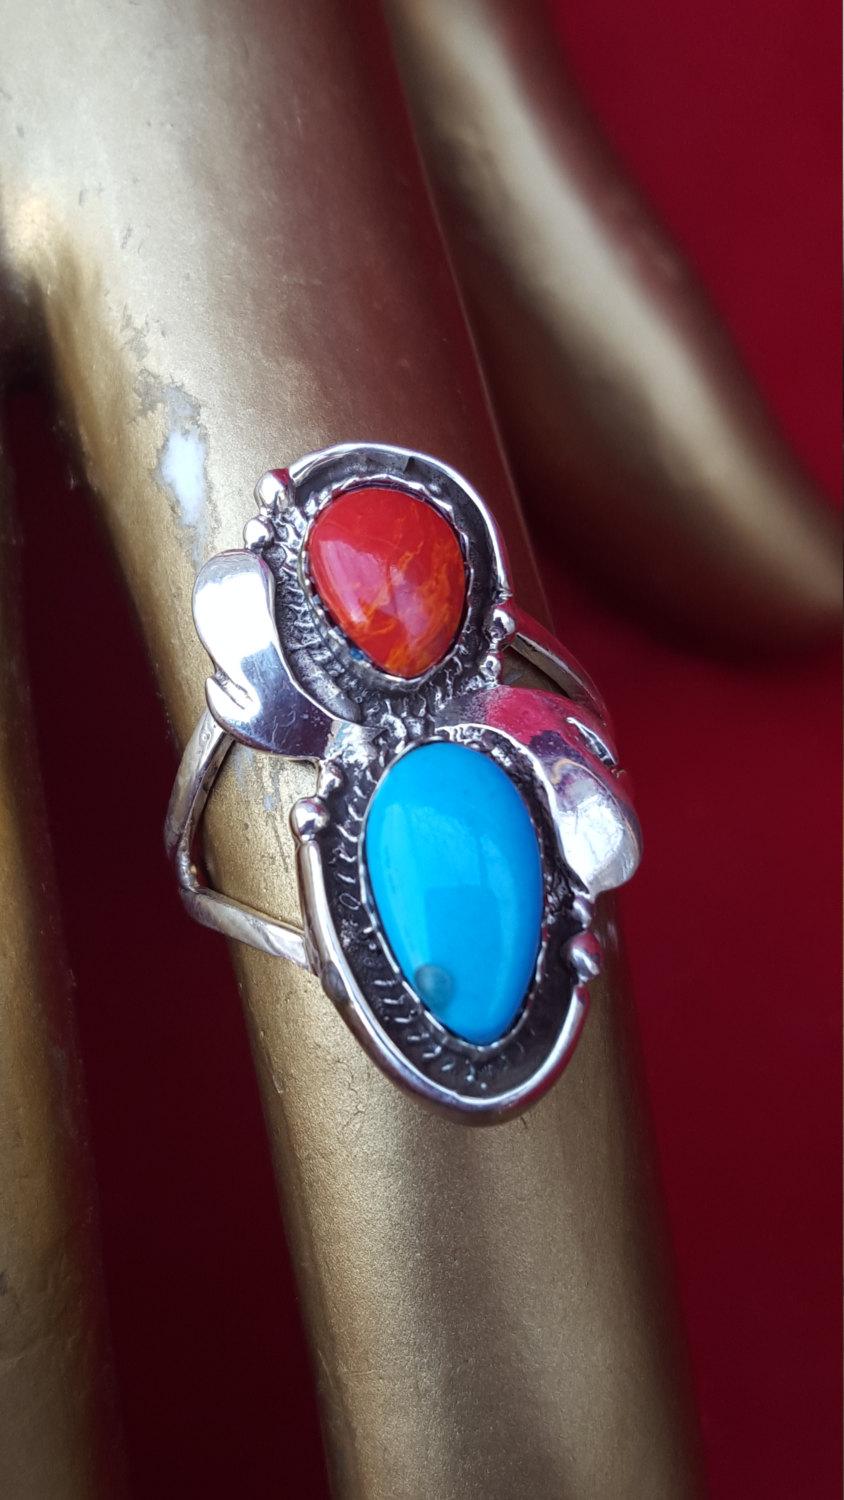 Wedding - Sterling Silver Ring.Turquoise Ring Coral Ring.Handmade Ring.Indian Ring.Statement Ring.Bridal Sets.Statement Ring.Cocktail Rings.R141-150